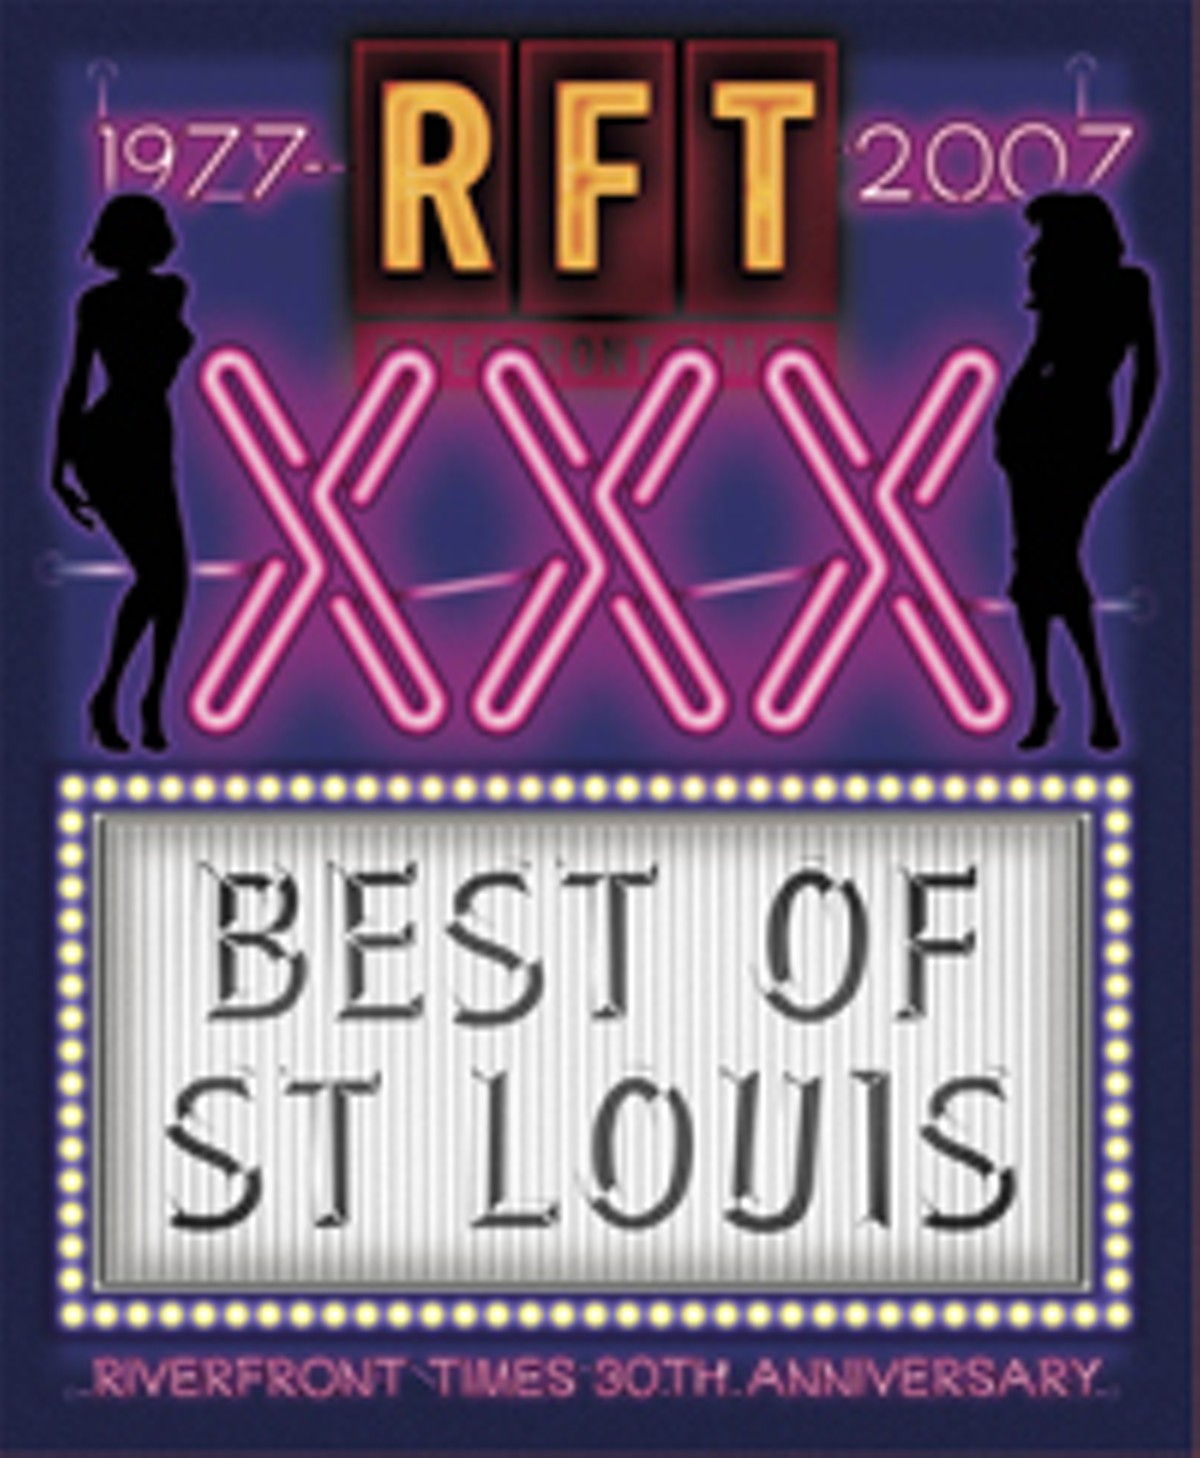 Best of St. Louis 2007 Issue Cover